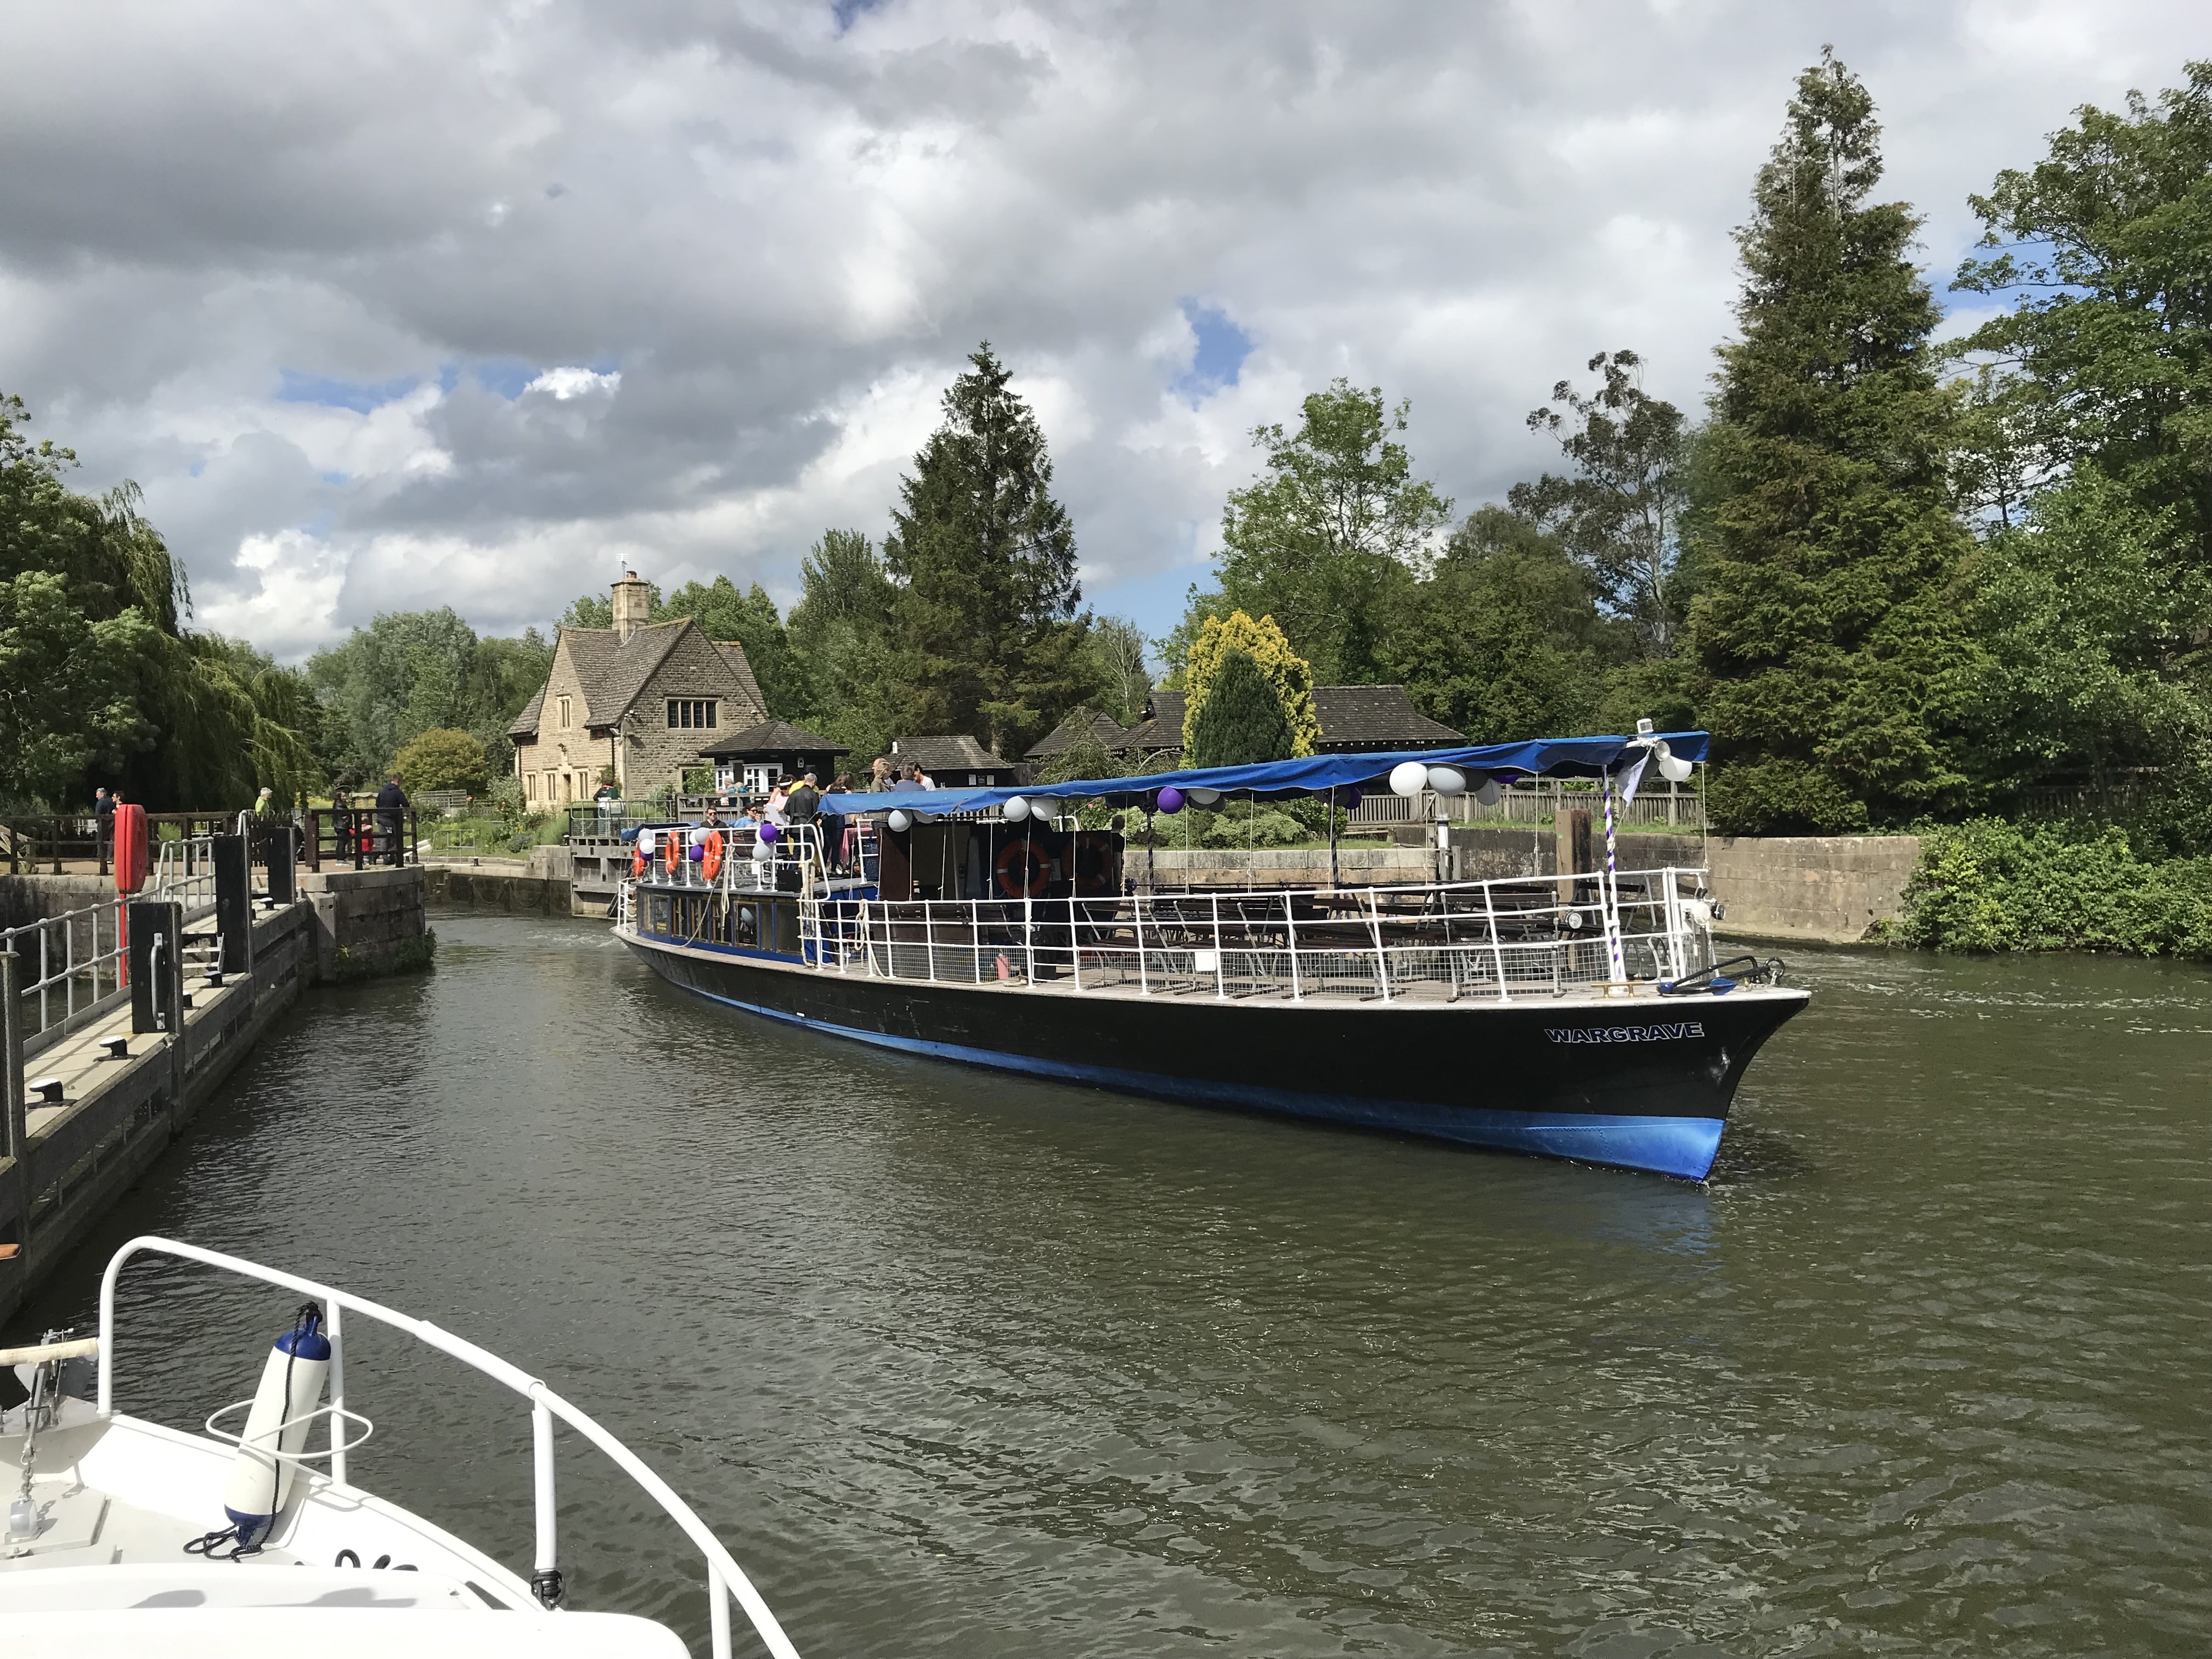 Salters steamer 'Wargrave leaving Iffley Lock' passing by